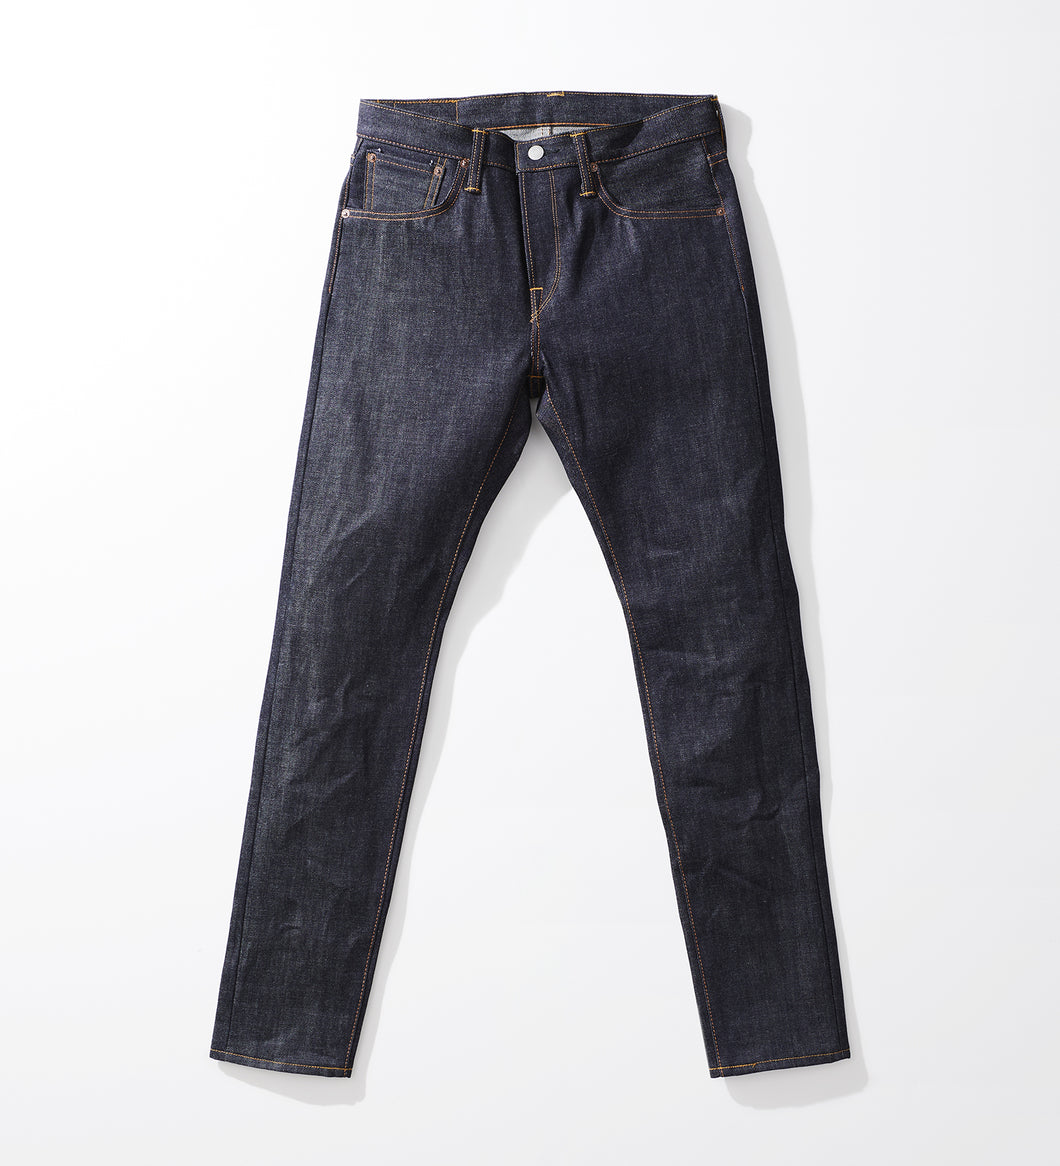 SLIM TAPERED Unwashed [Length 34 inch]